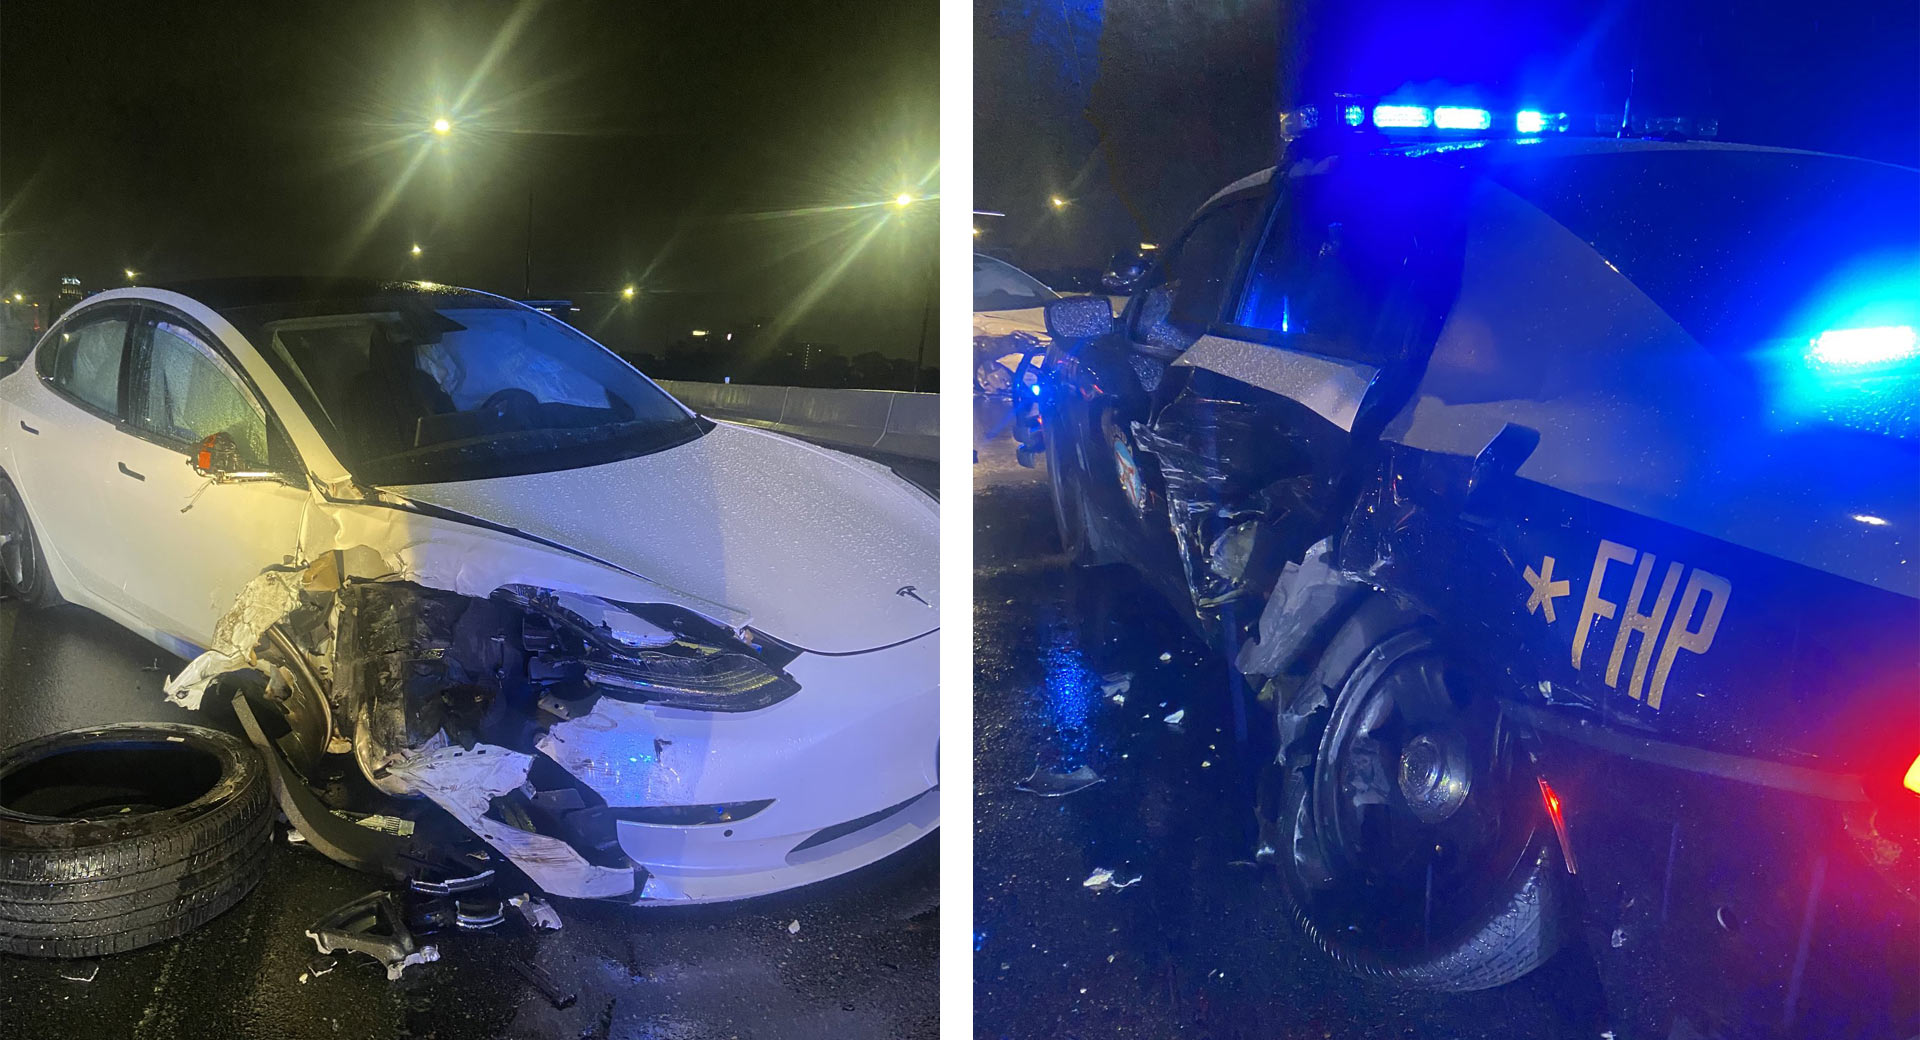 Florida Police Release New Video Of Tesla On Autopilot Crashing Into Patrol Car [Updated]